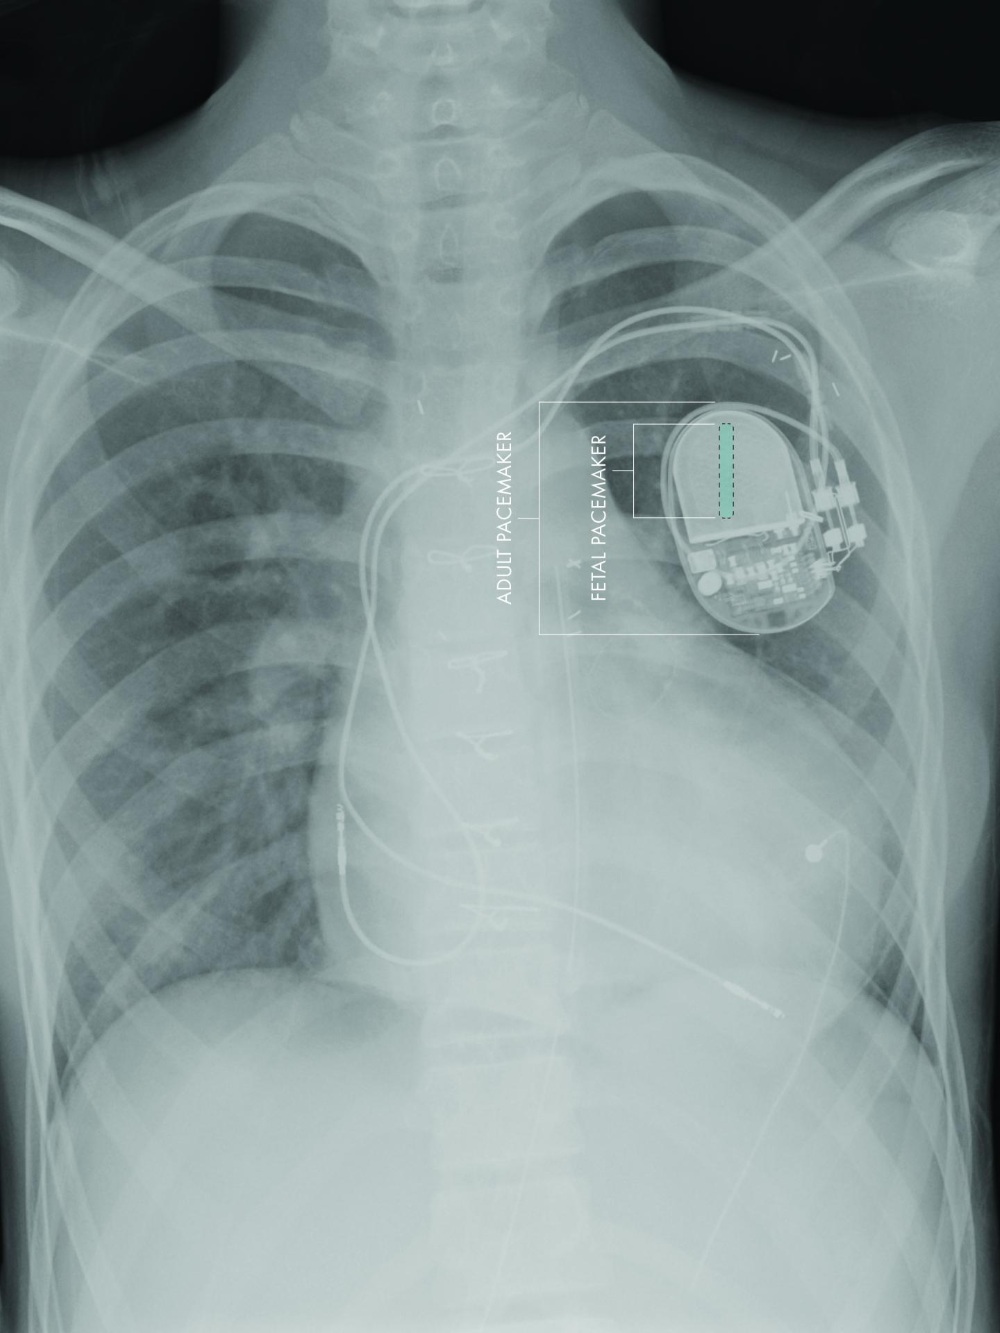 Micropacemaker